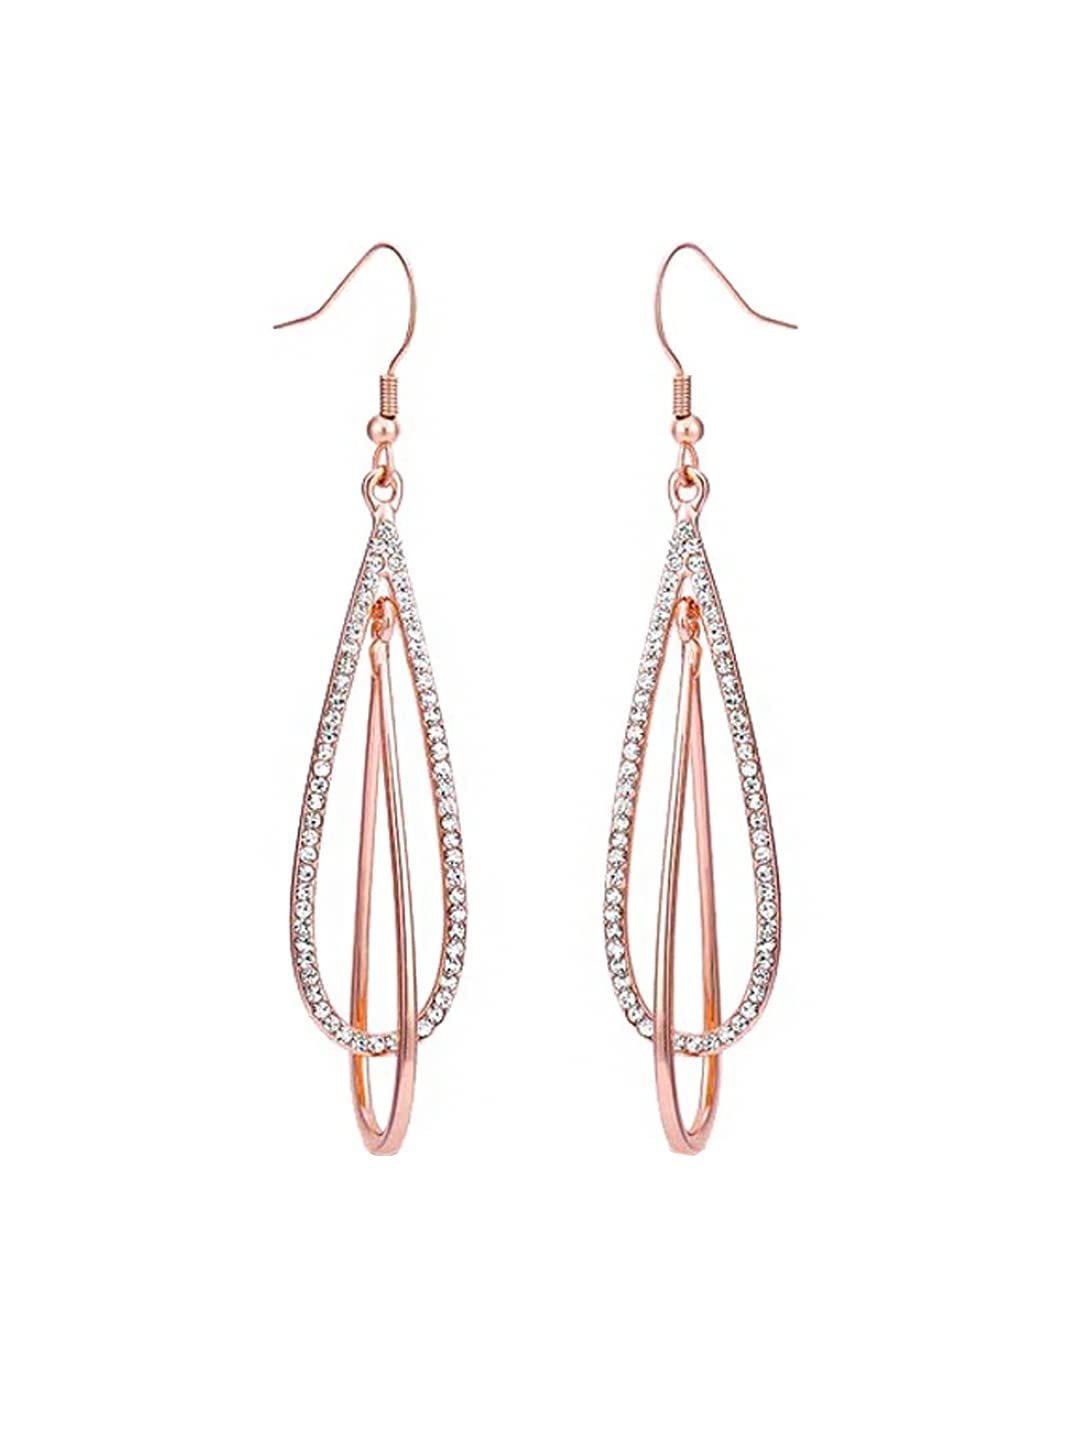 Yellow Chimes Danglers Earrings for Women Stainless Steel Rose Gold Plated Crystal Studded Dangler Earrings for Women and Girls